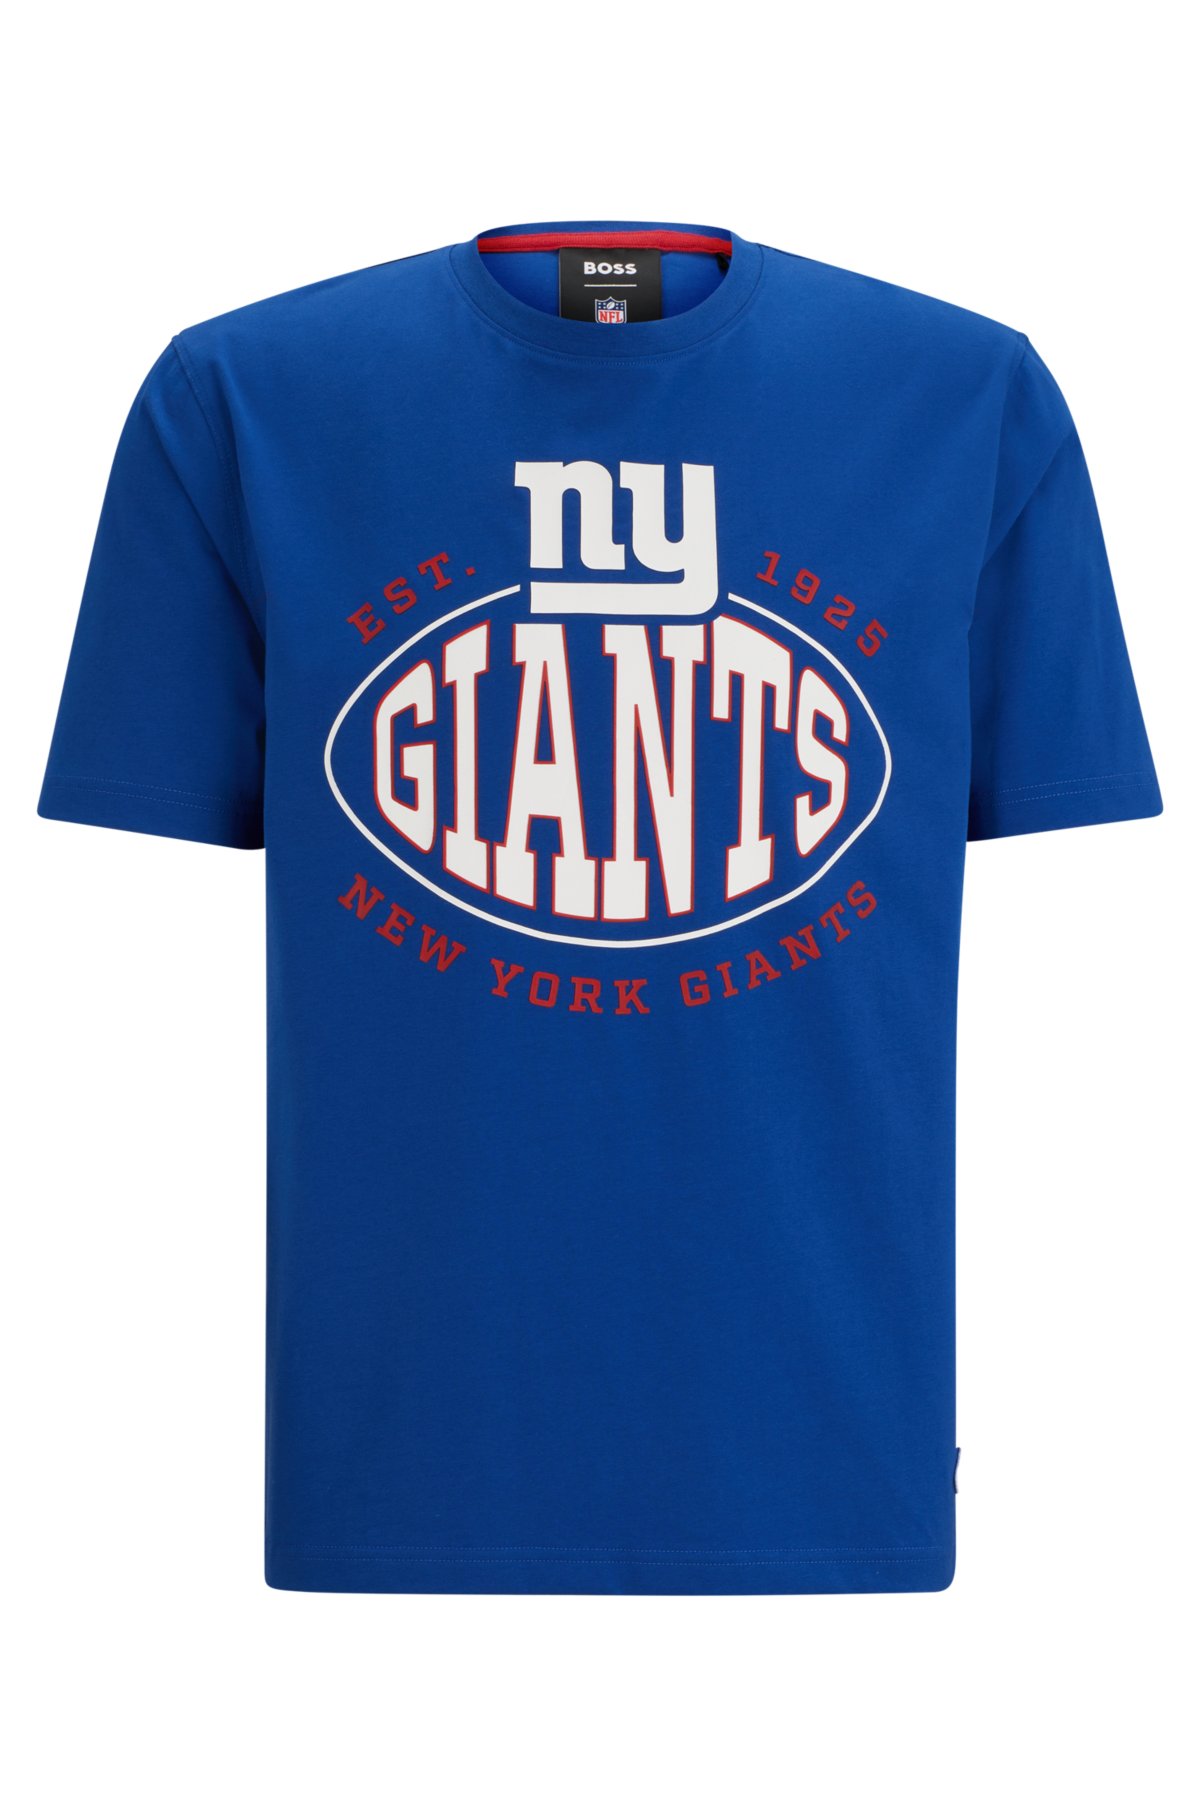  BOSS x NFL stretch-cotton T-shirt with collaborative branding, Giants